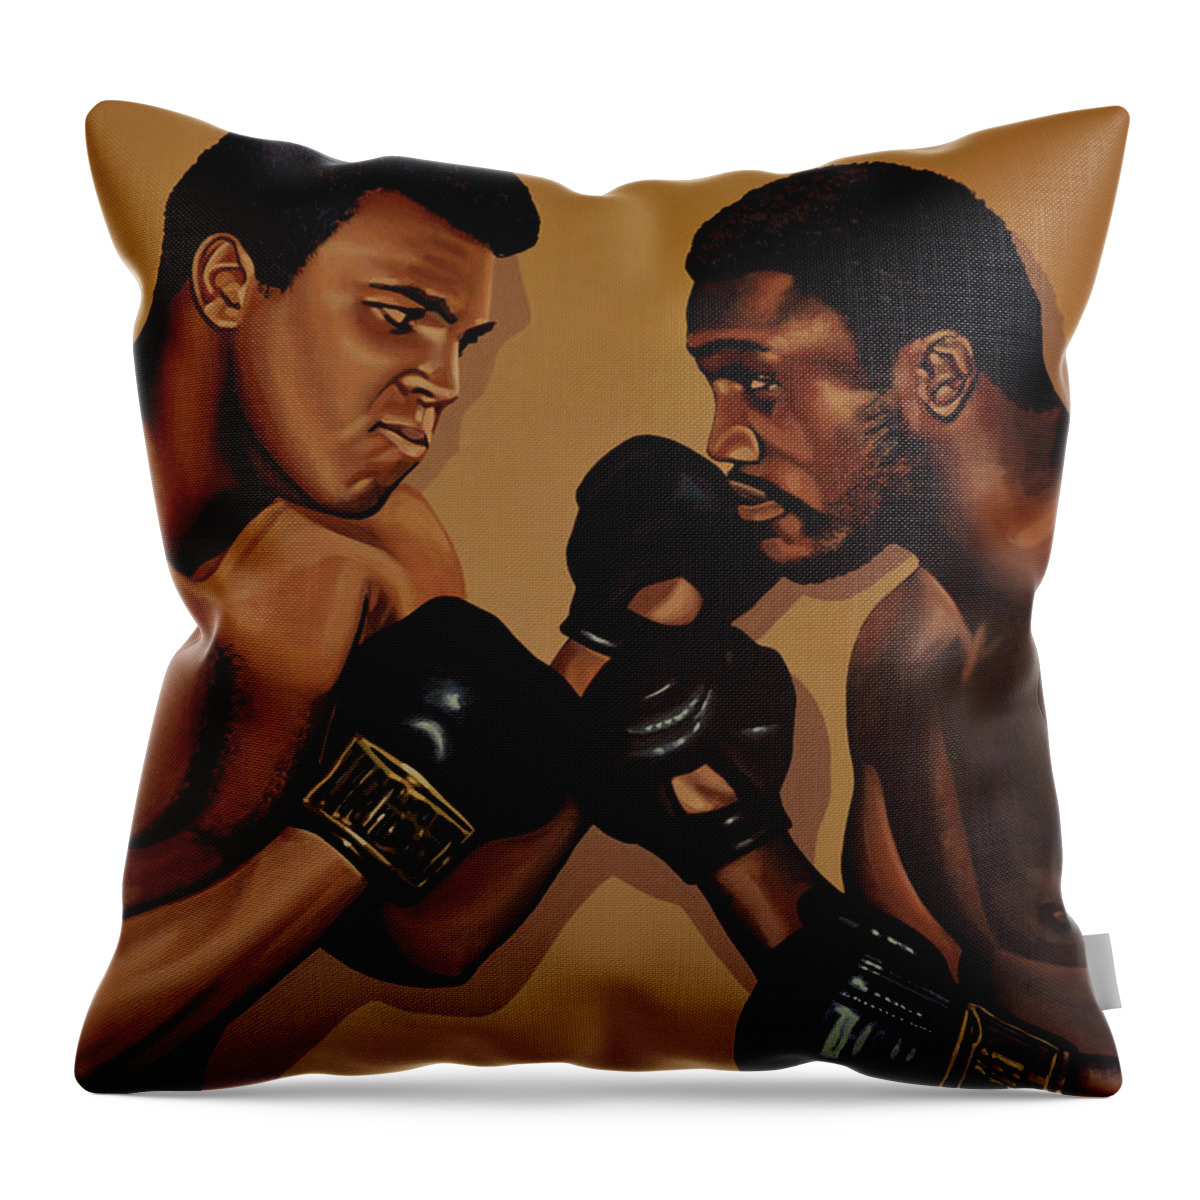 Mohammed Ali Versus Joe Frazier Throw Pillow featuring the painting Muhammad Ali and Joe Frazier by Paul Meijering